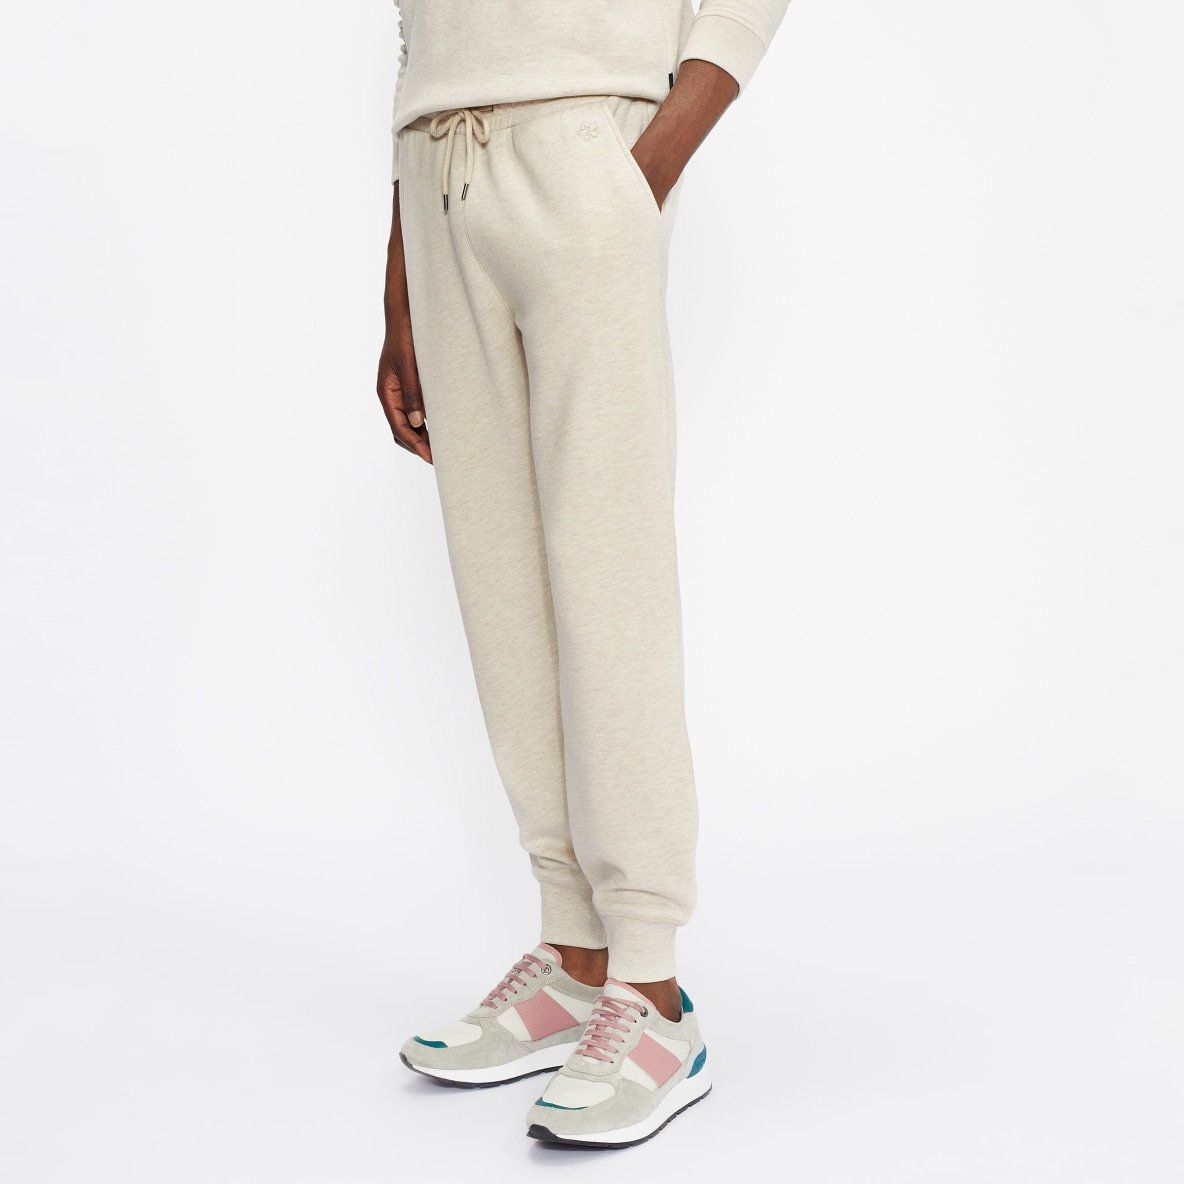 Gotstyle Fashion - Ted Baker Joggers Jersey Knit Jogger - Beige